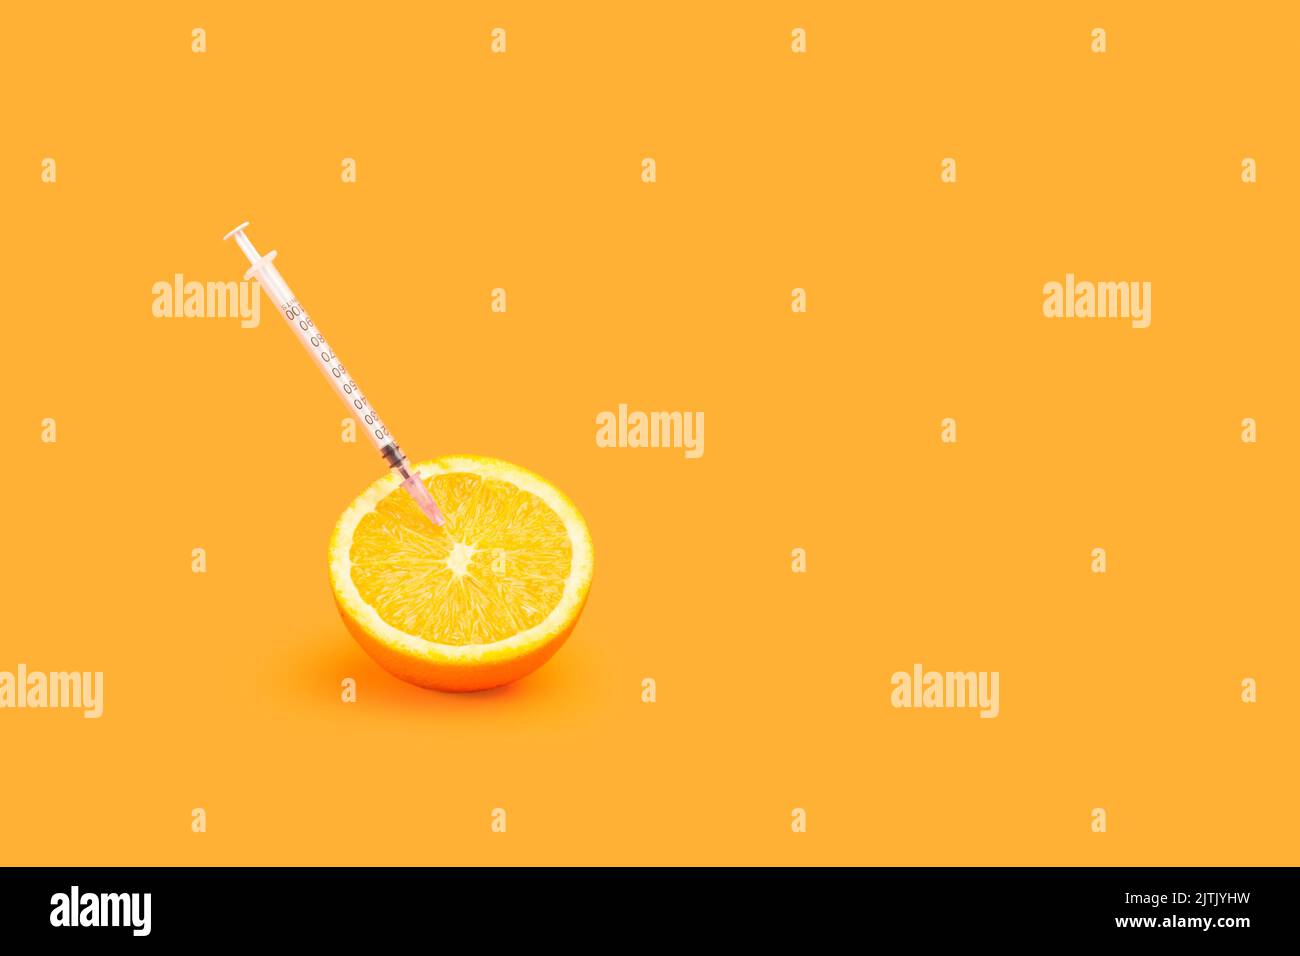 A half orange with a syringe stuck on an orange background with copy space Stock Photo